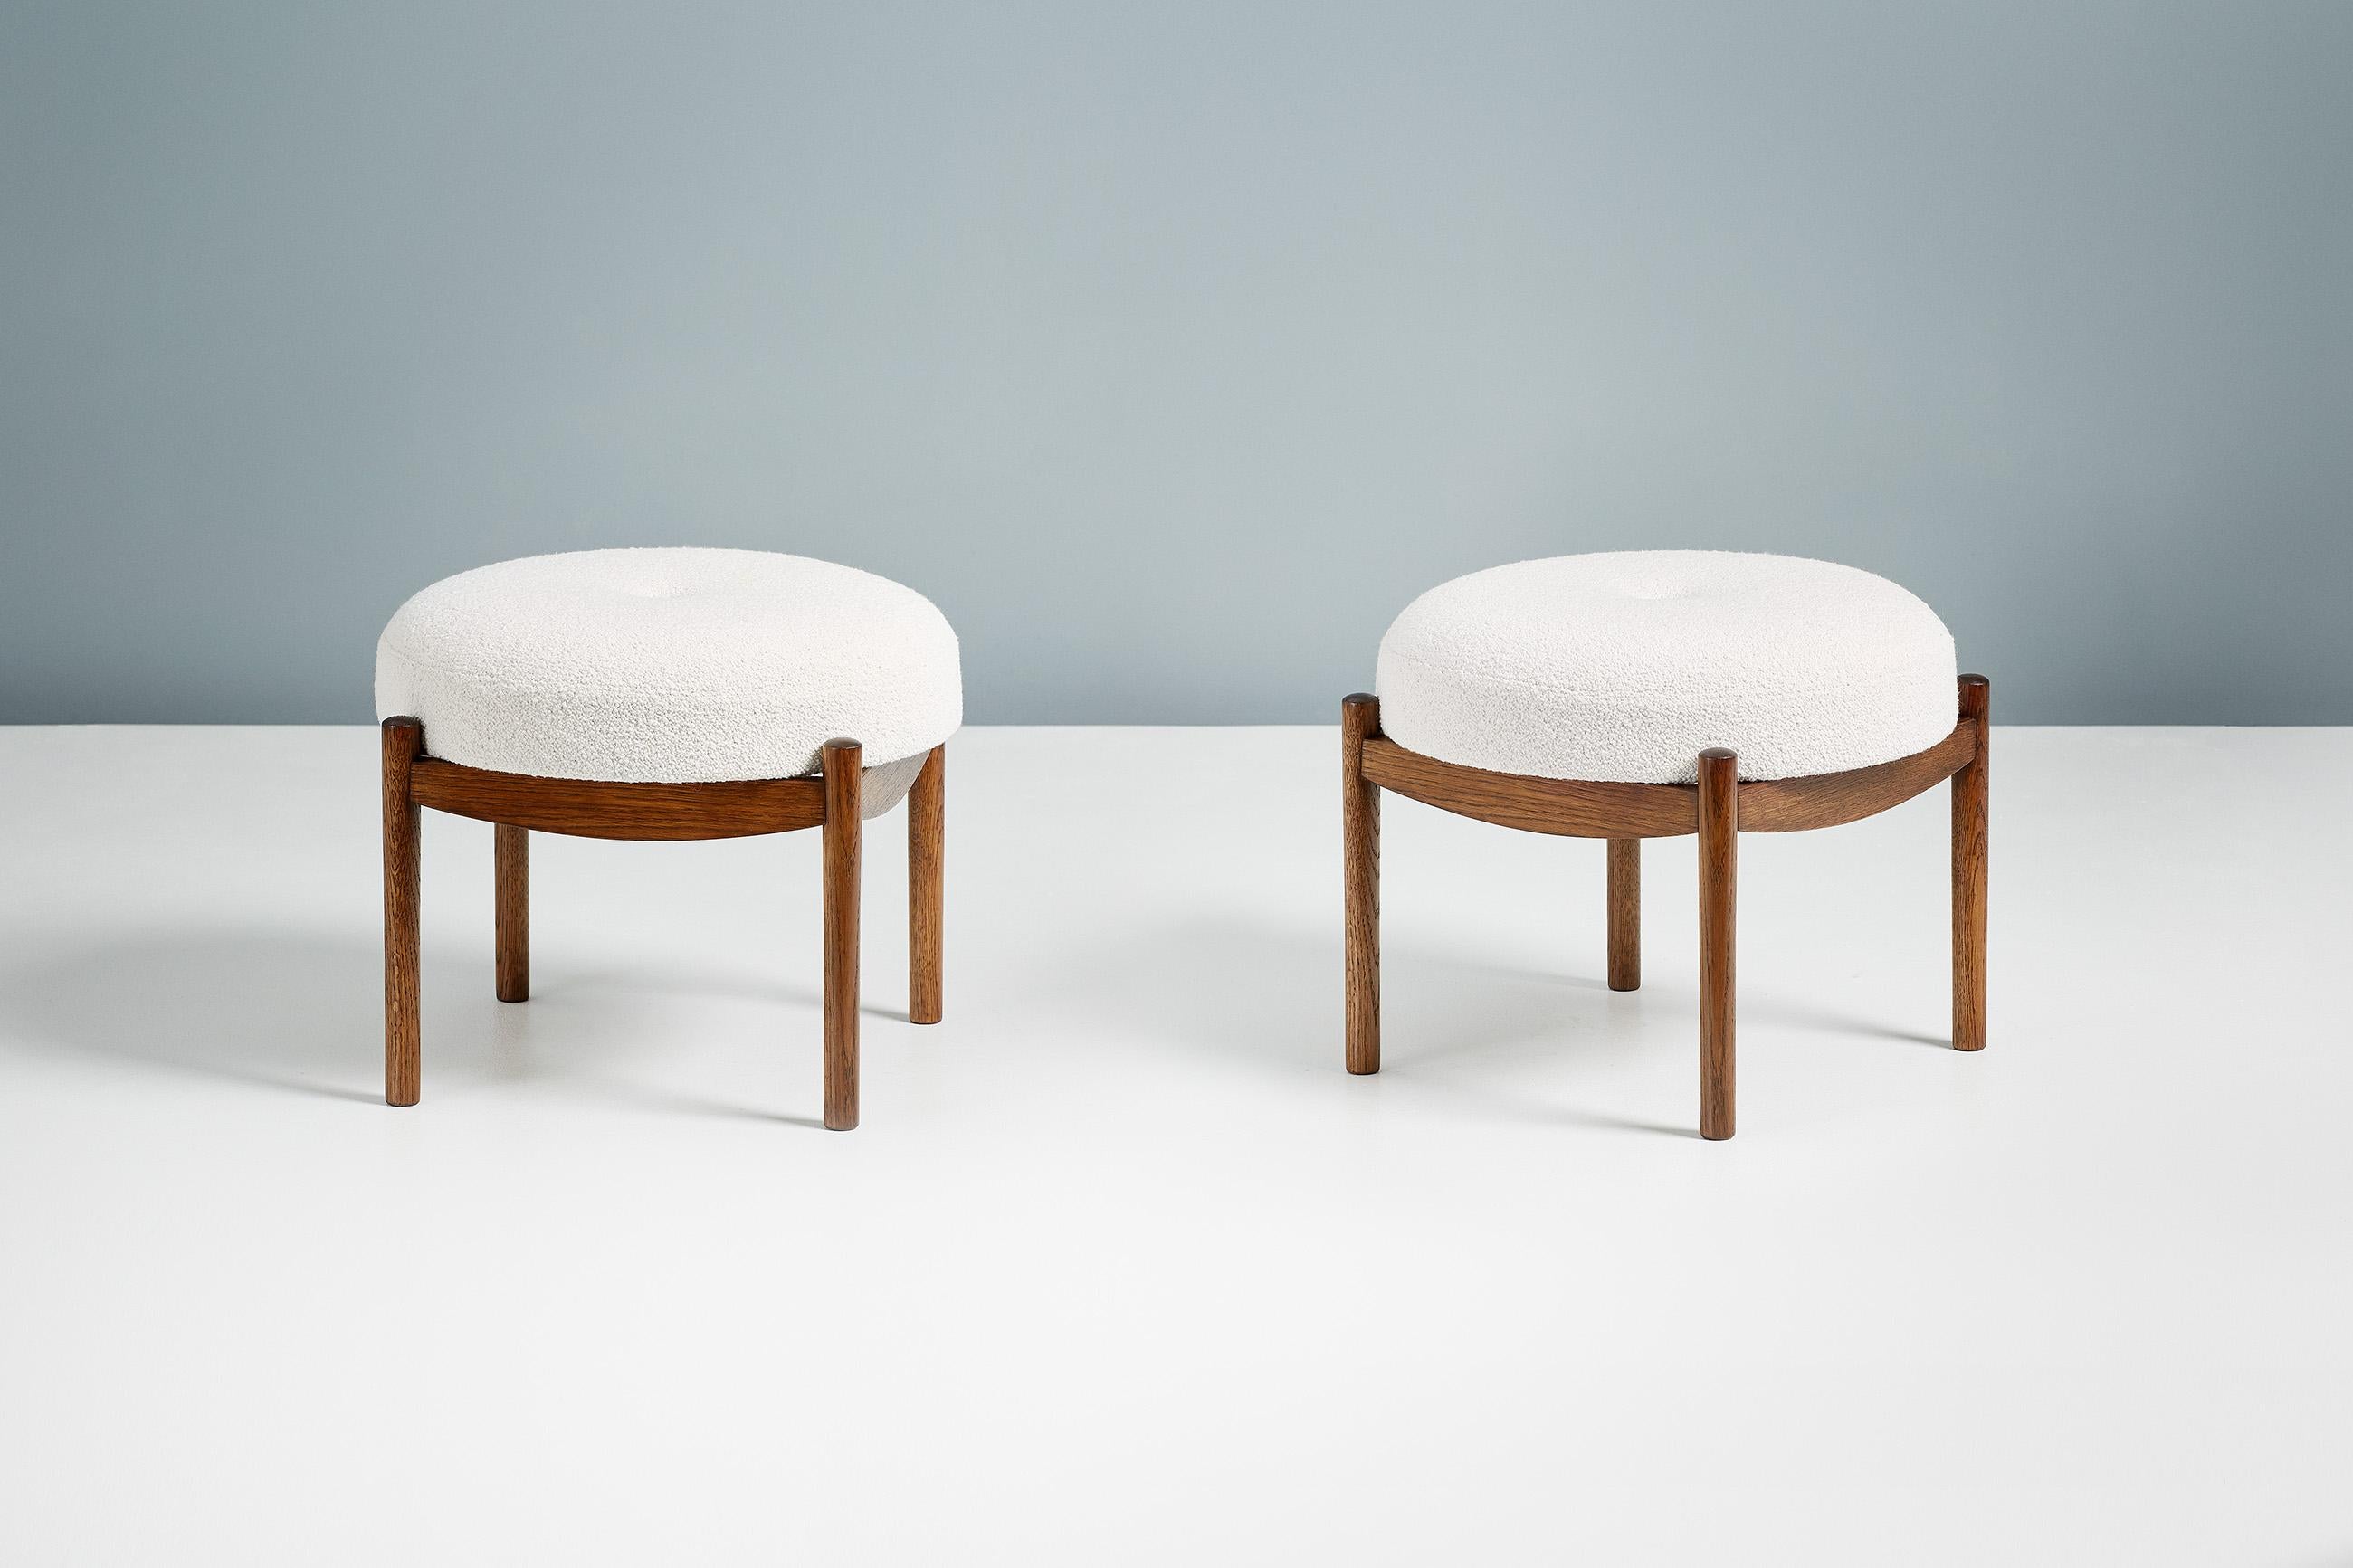 Dagmar Design

Blek Ottoman

A custom-made round ottoman with solid wood frame developed & produced at our workshops in London. These examples have frames in fumed oak with seats upholstered in off-white boucle. Blek is available to order in a